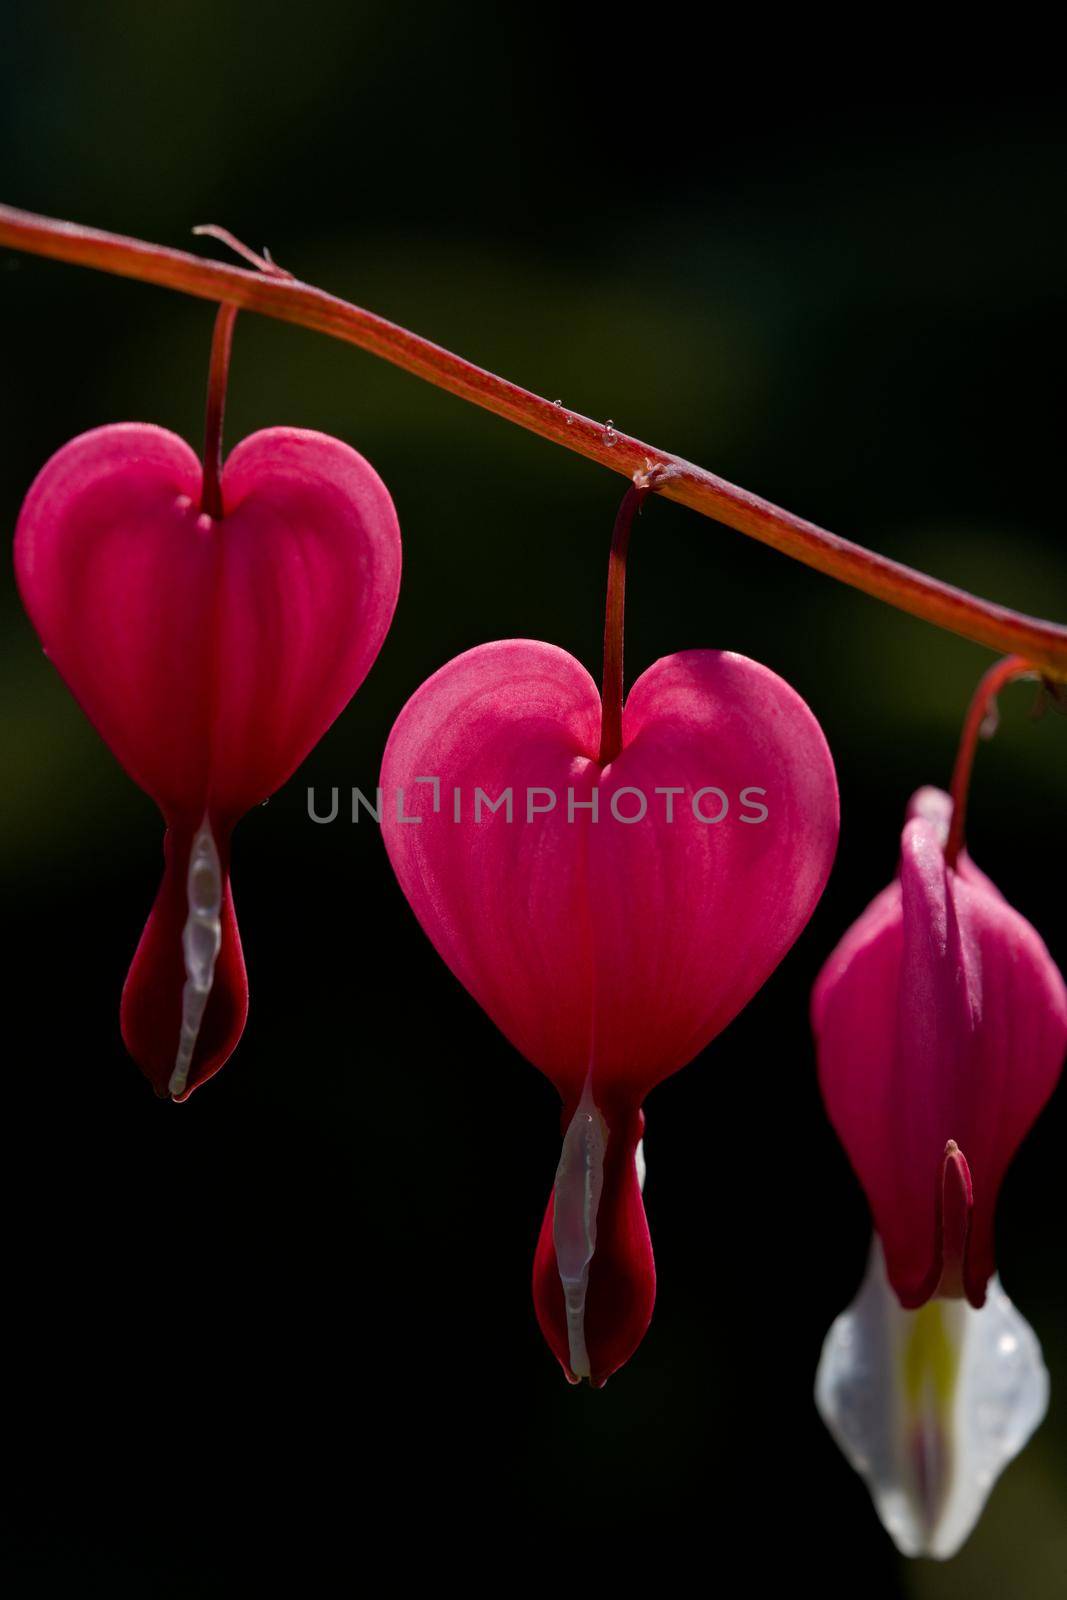 Vertical close up macro image of vibrant pink bleeding heart flowers. 3 heart shaped inflorescence hang like pendulums from the plant stem, Back lit